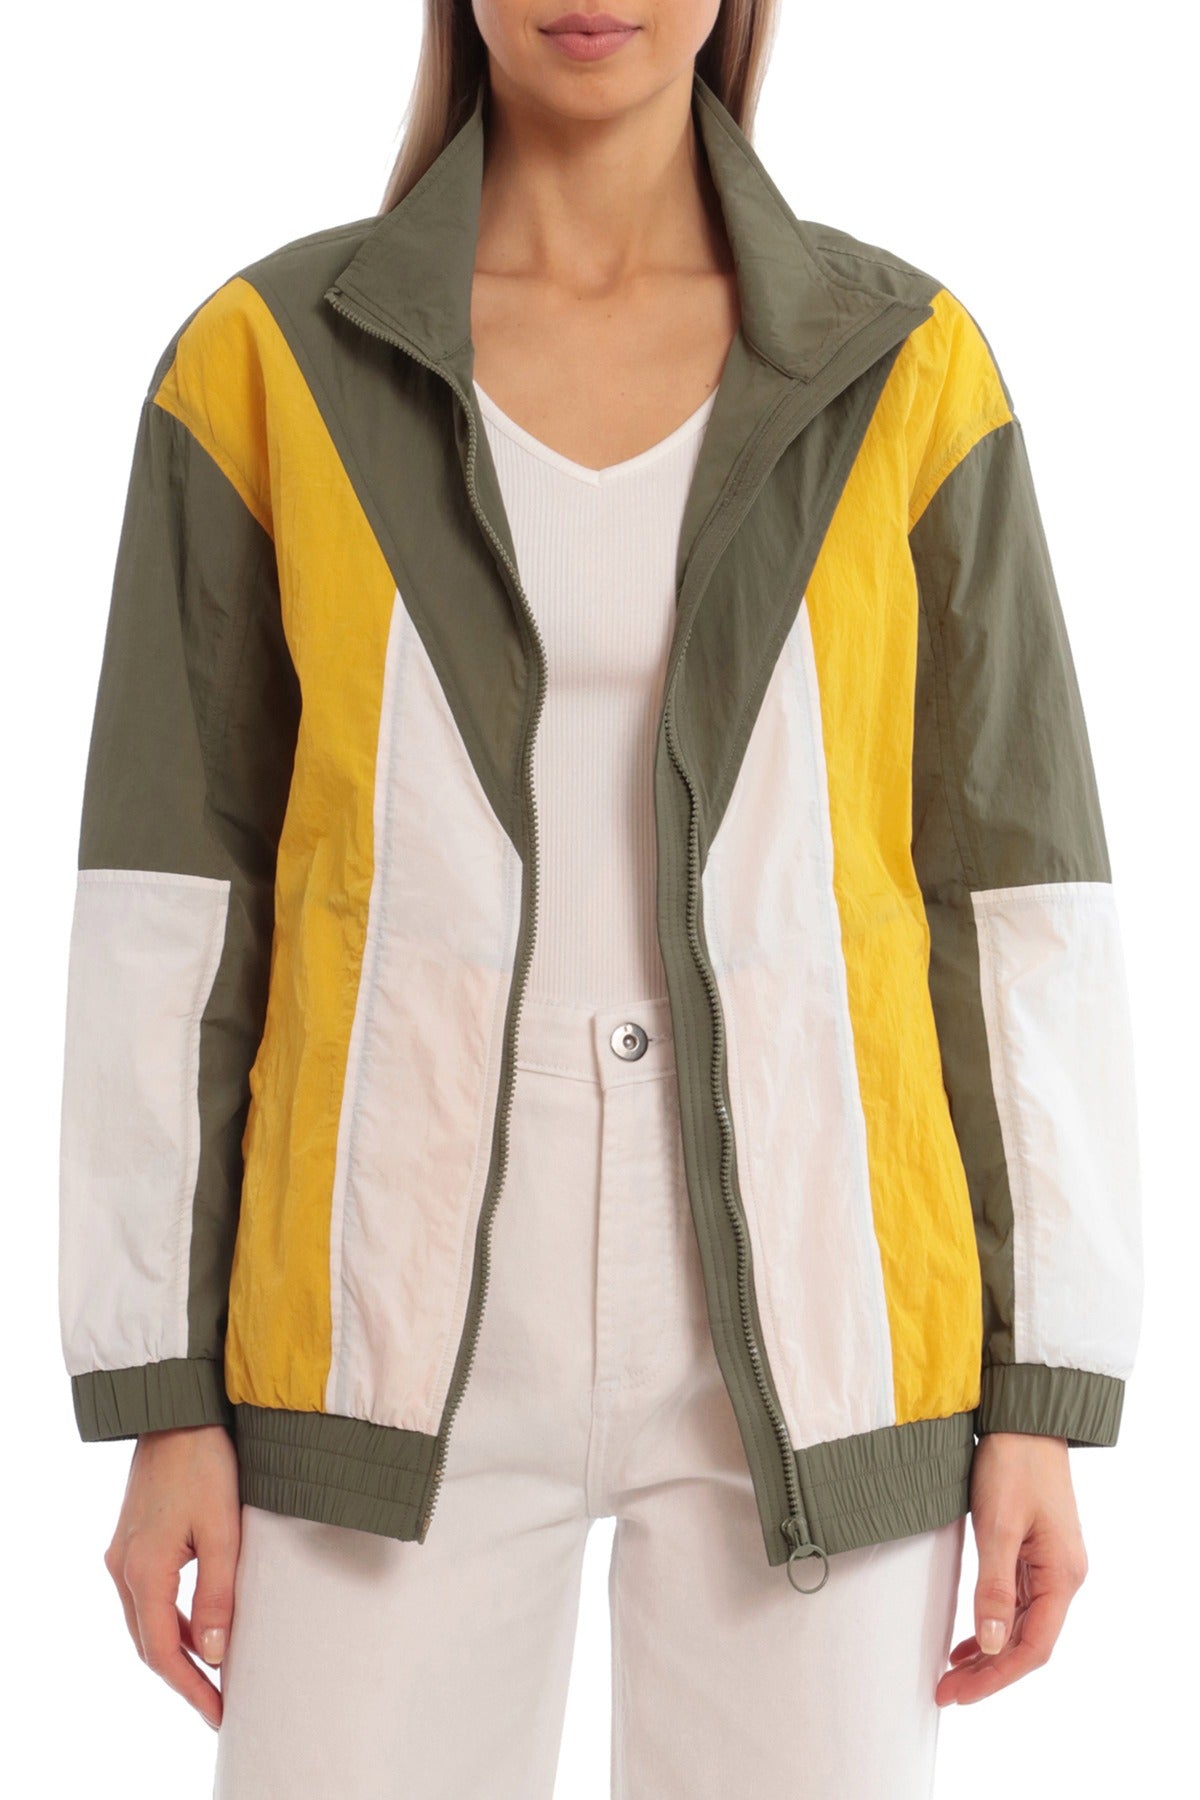 Colorblock Nylon Track Jacket Outerwear Lightweight Olive Green Yellow White